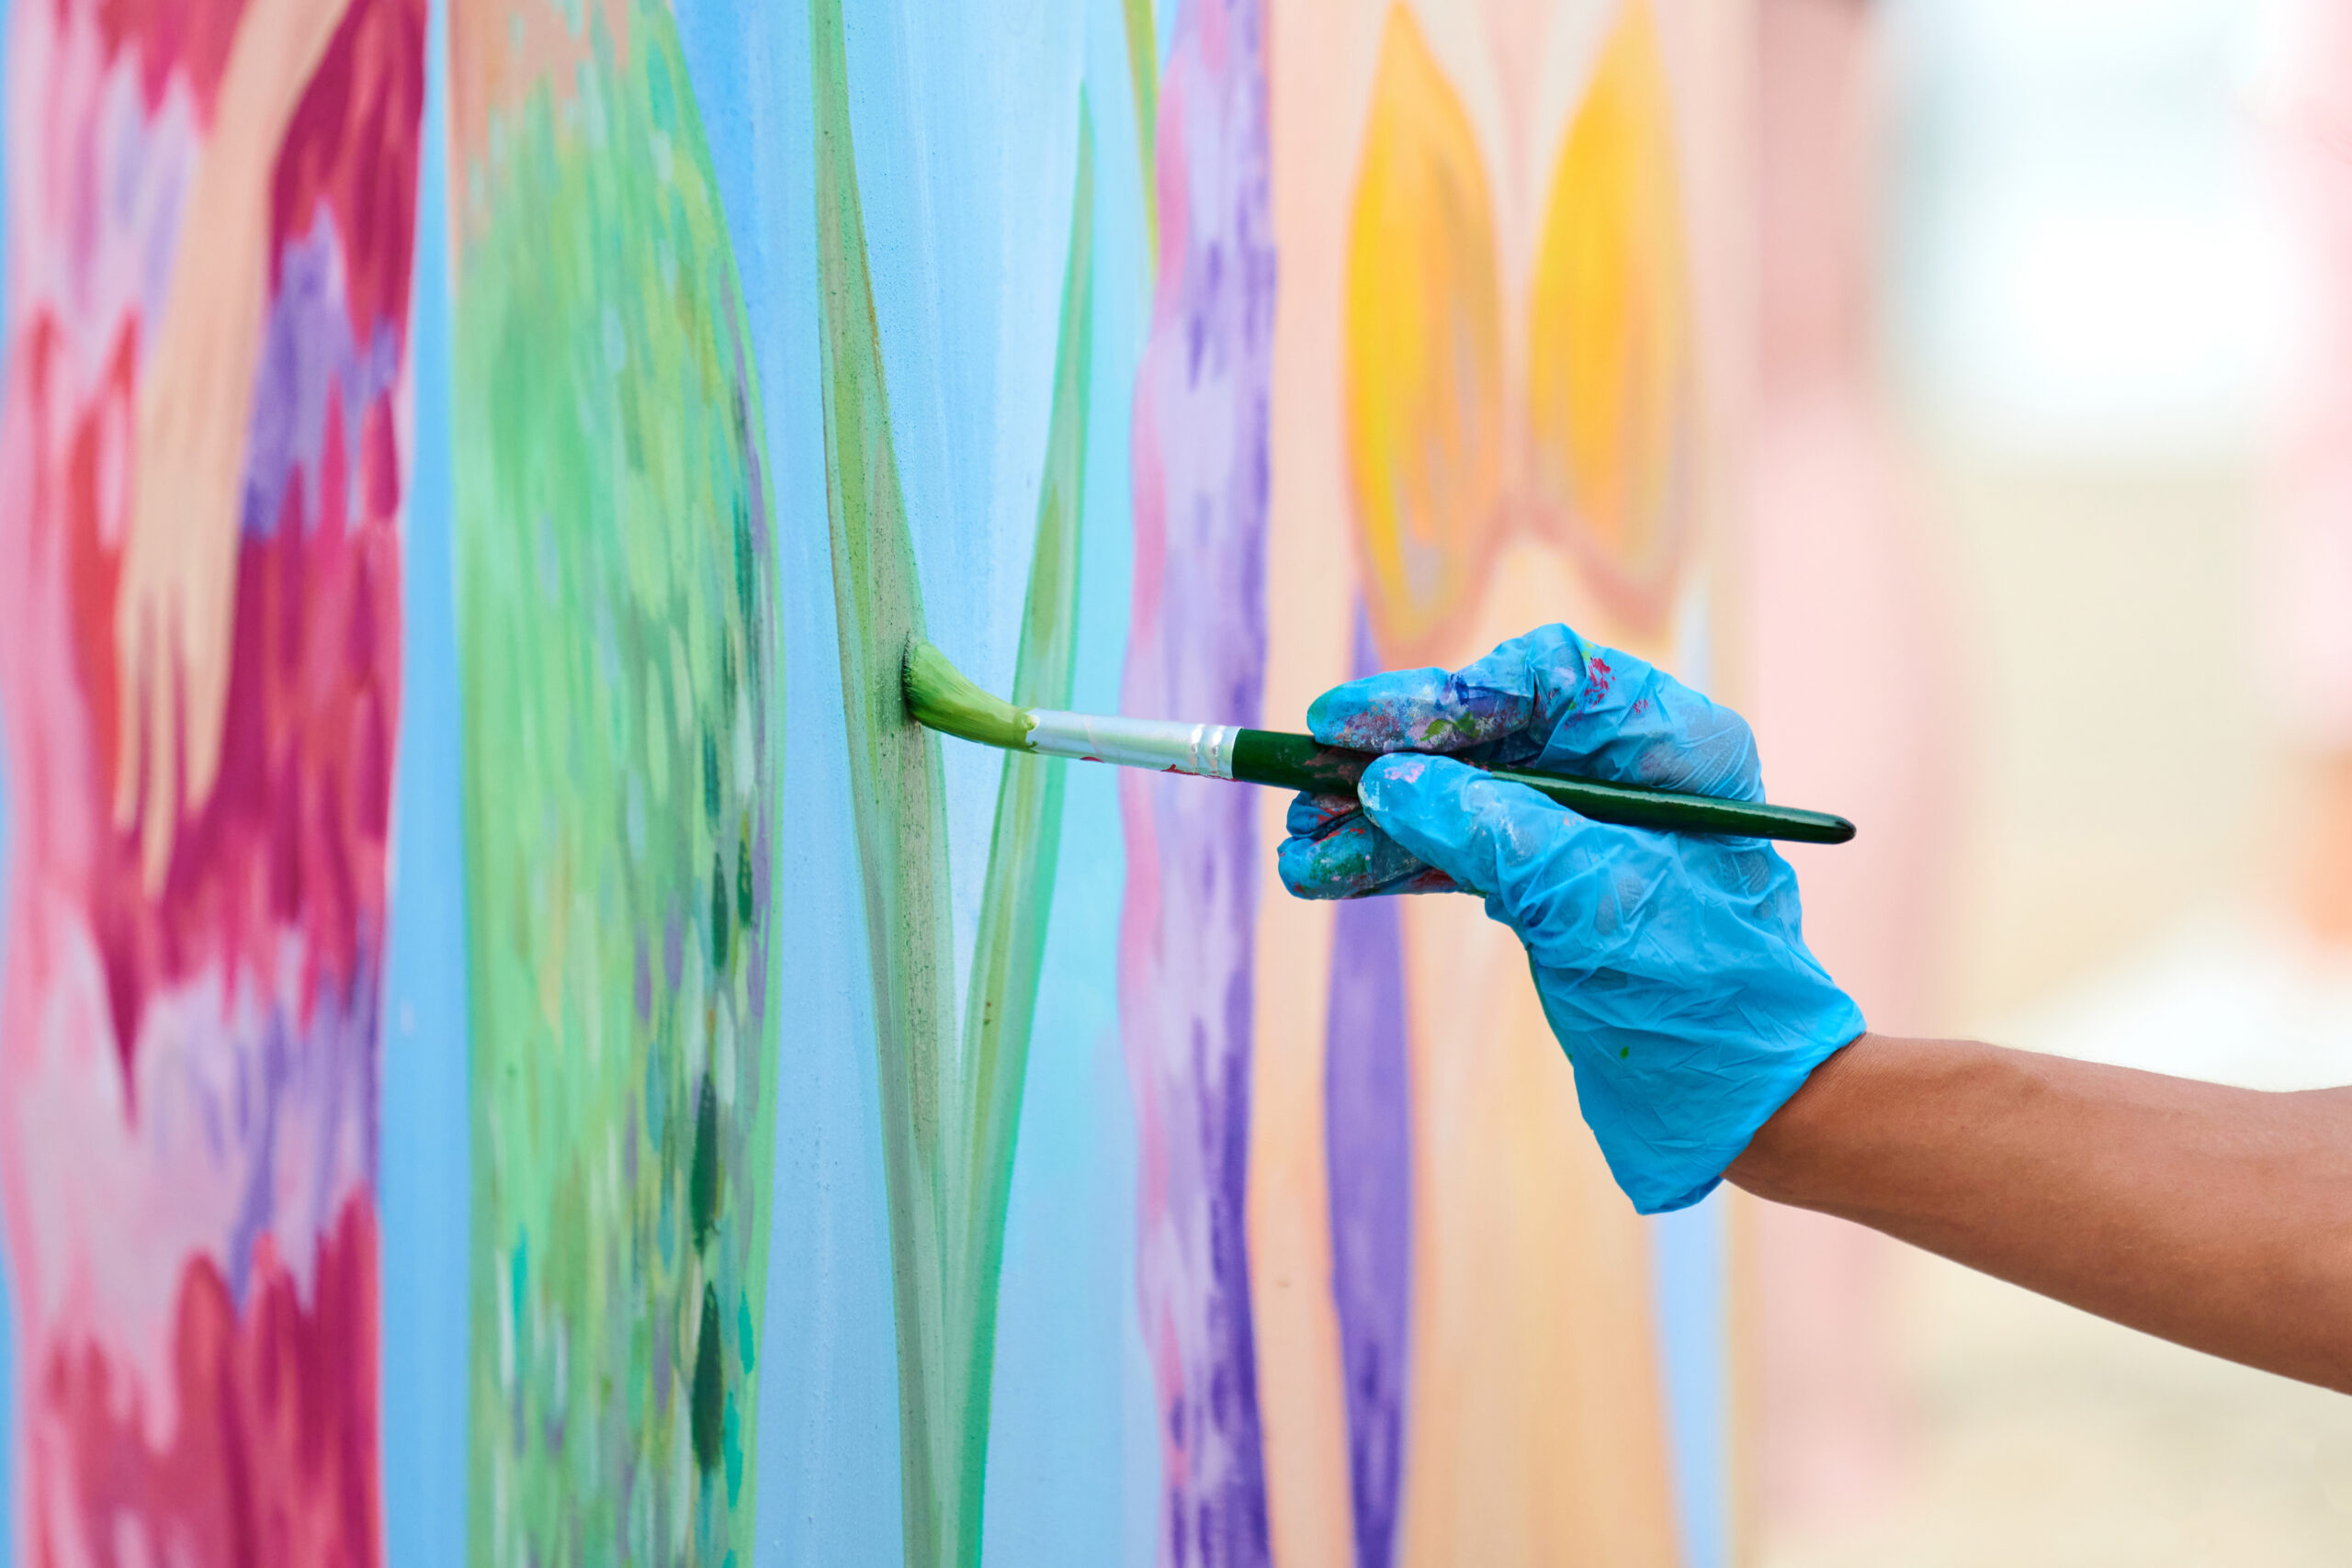 Artist's hand in blue gloves with paintbrush painting colorful picture at outdoor art festival